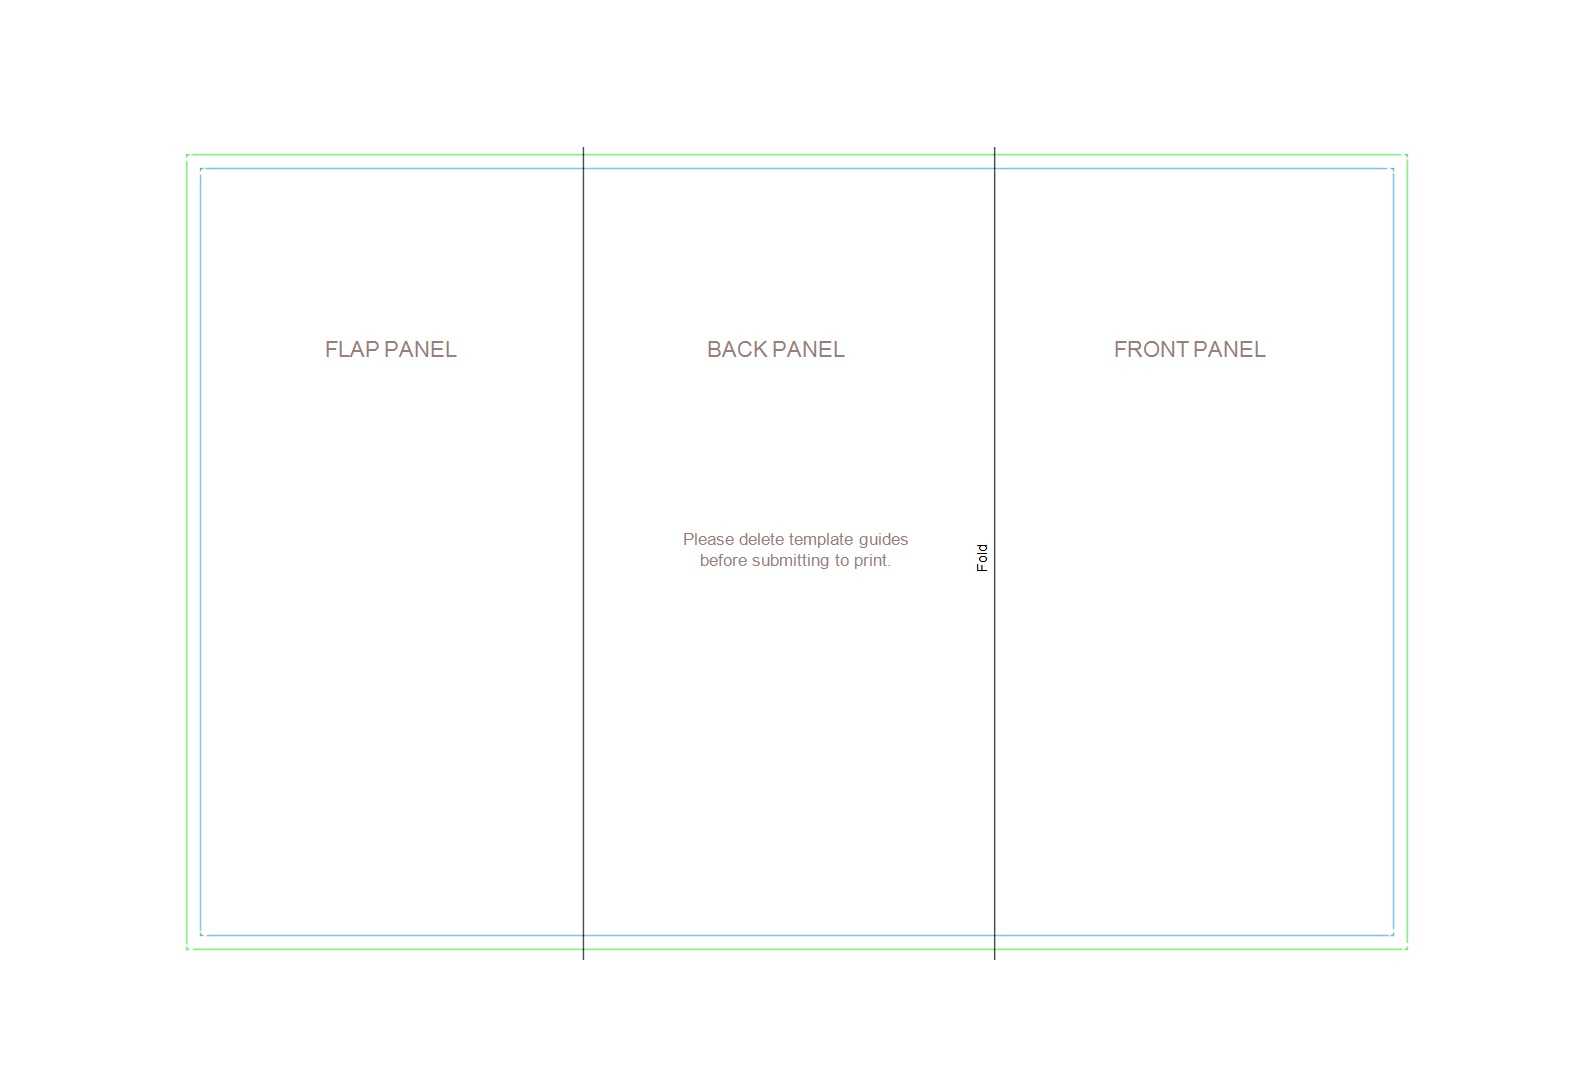 50 Free Pamphlet Templates [Word / Google Docs] ᐅ Template Lab For Brochure Template Google Drive